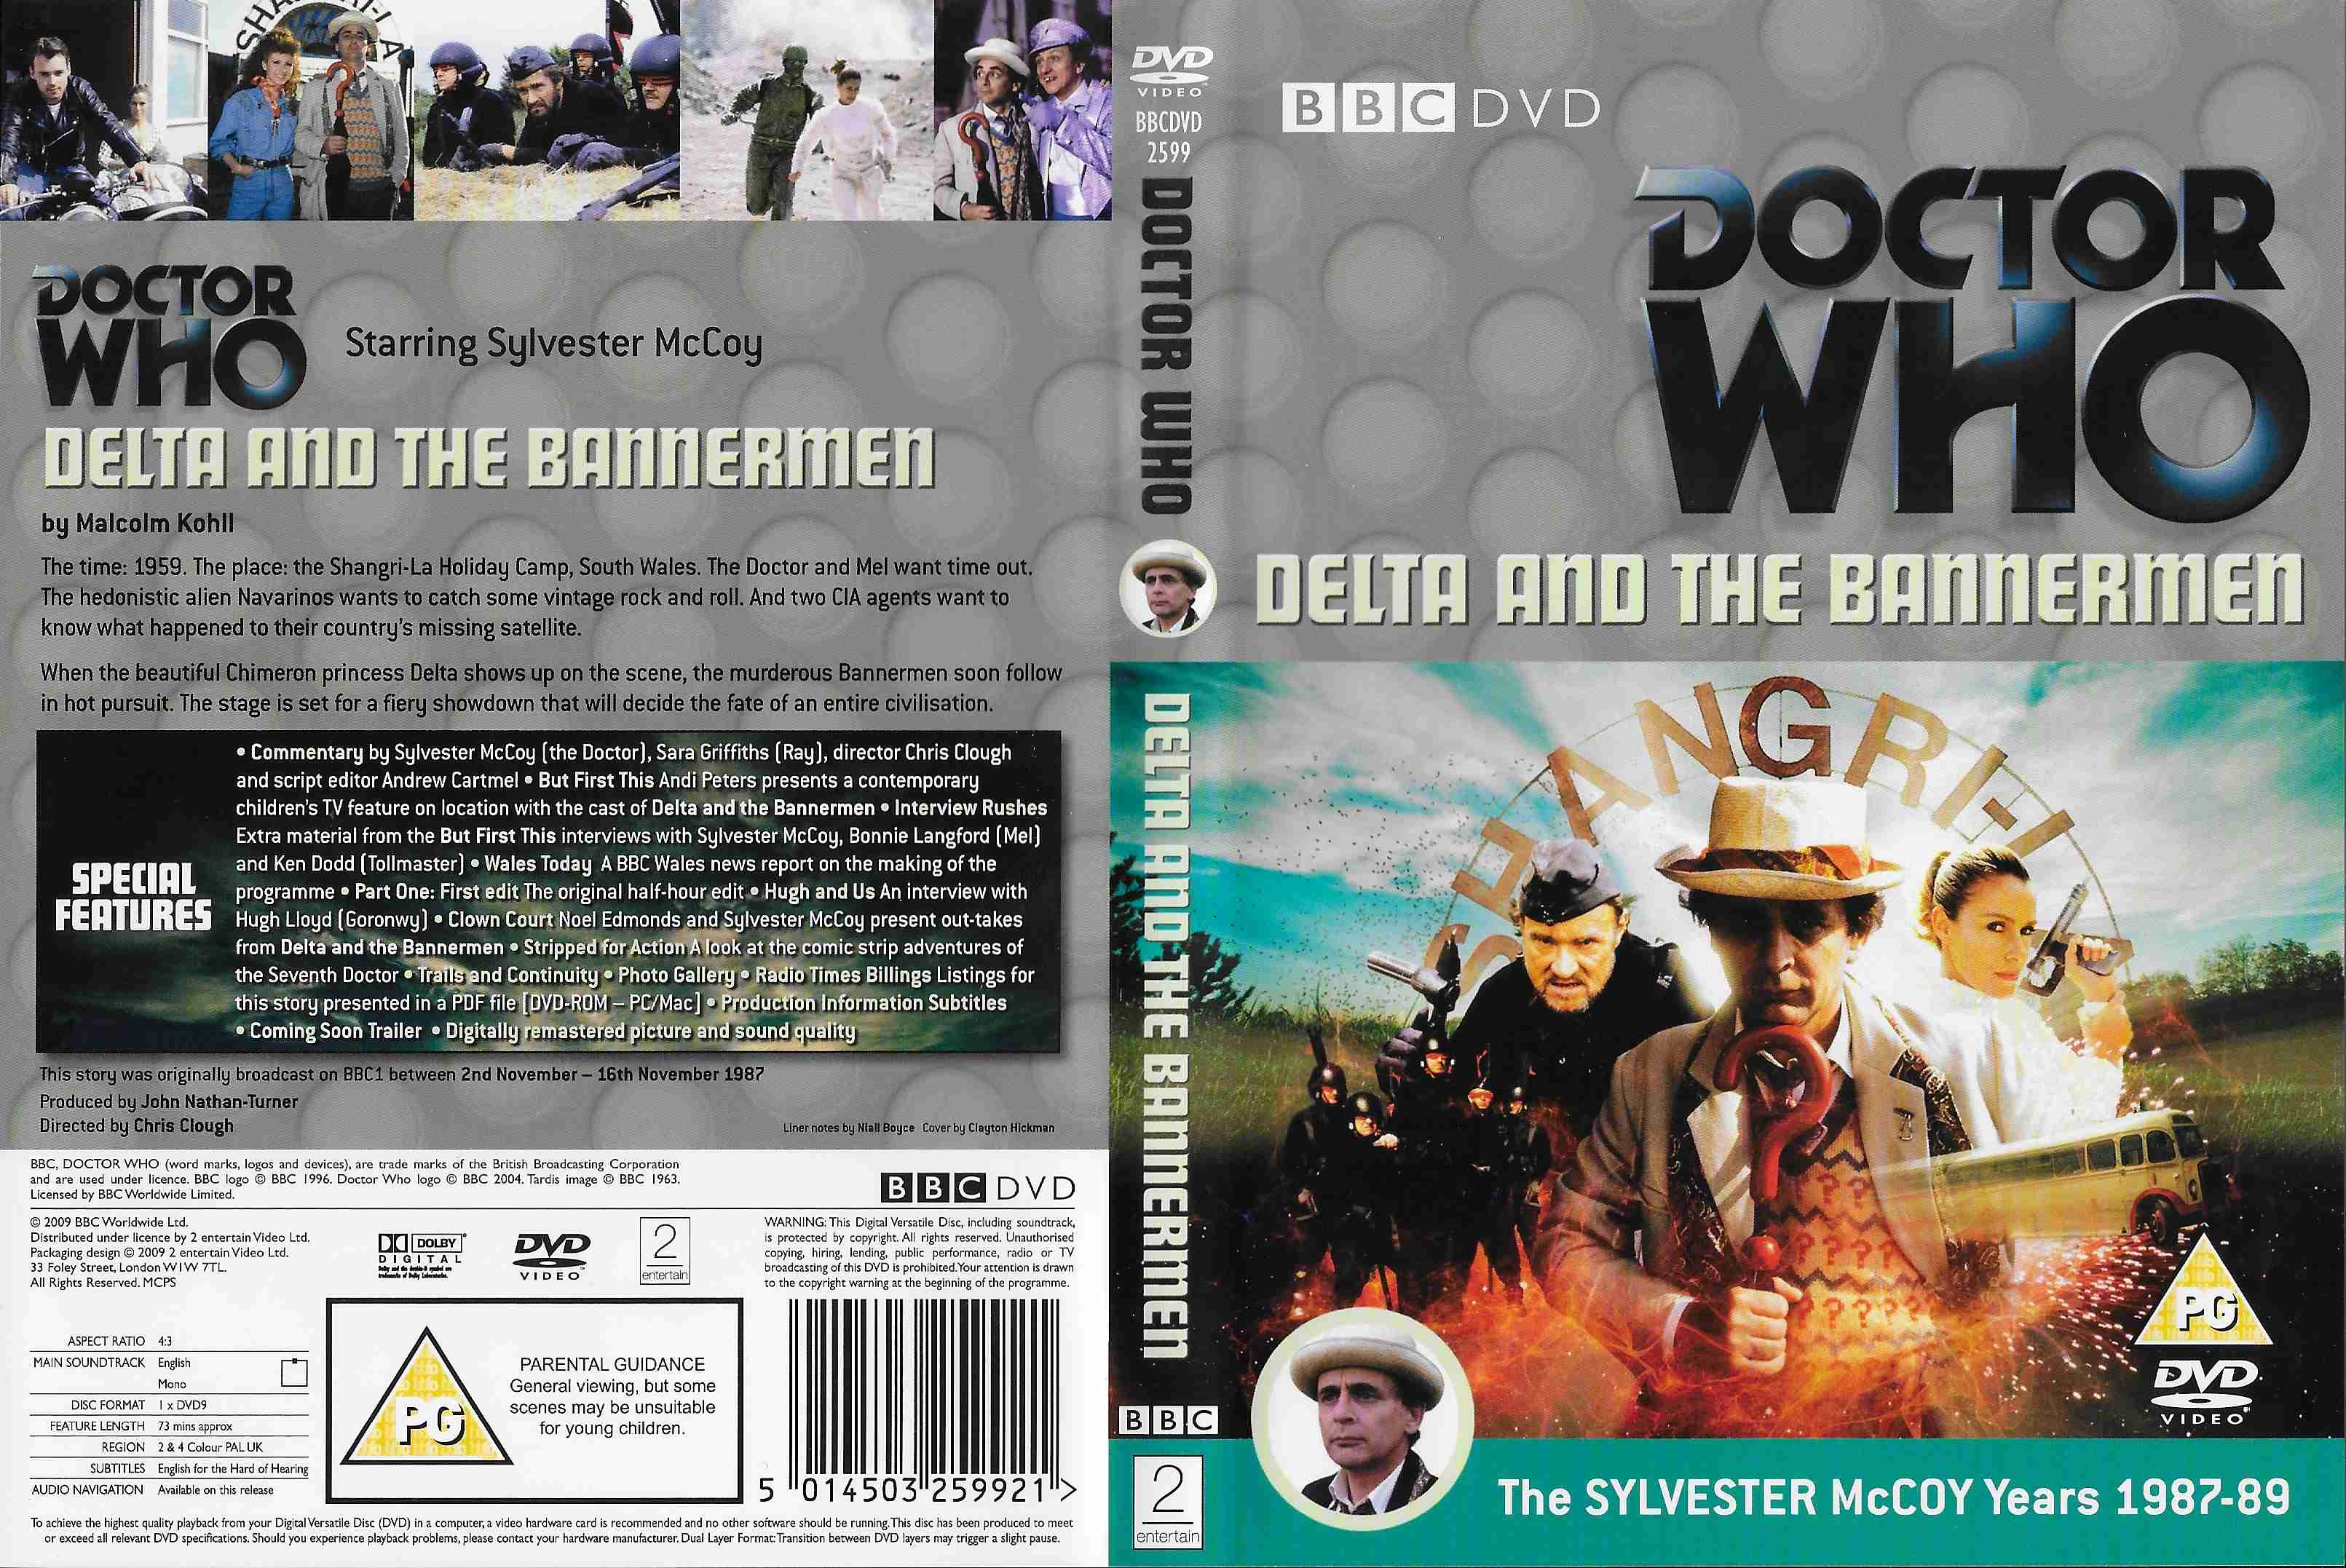 Picture of BBCDVD 2599 Doctor Who - Delta and the Bannermen by artist Malcolm Kohll from the BBC records and Tapes library